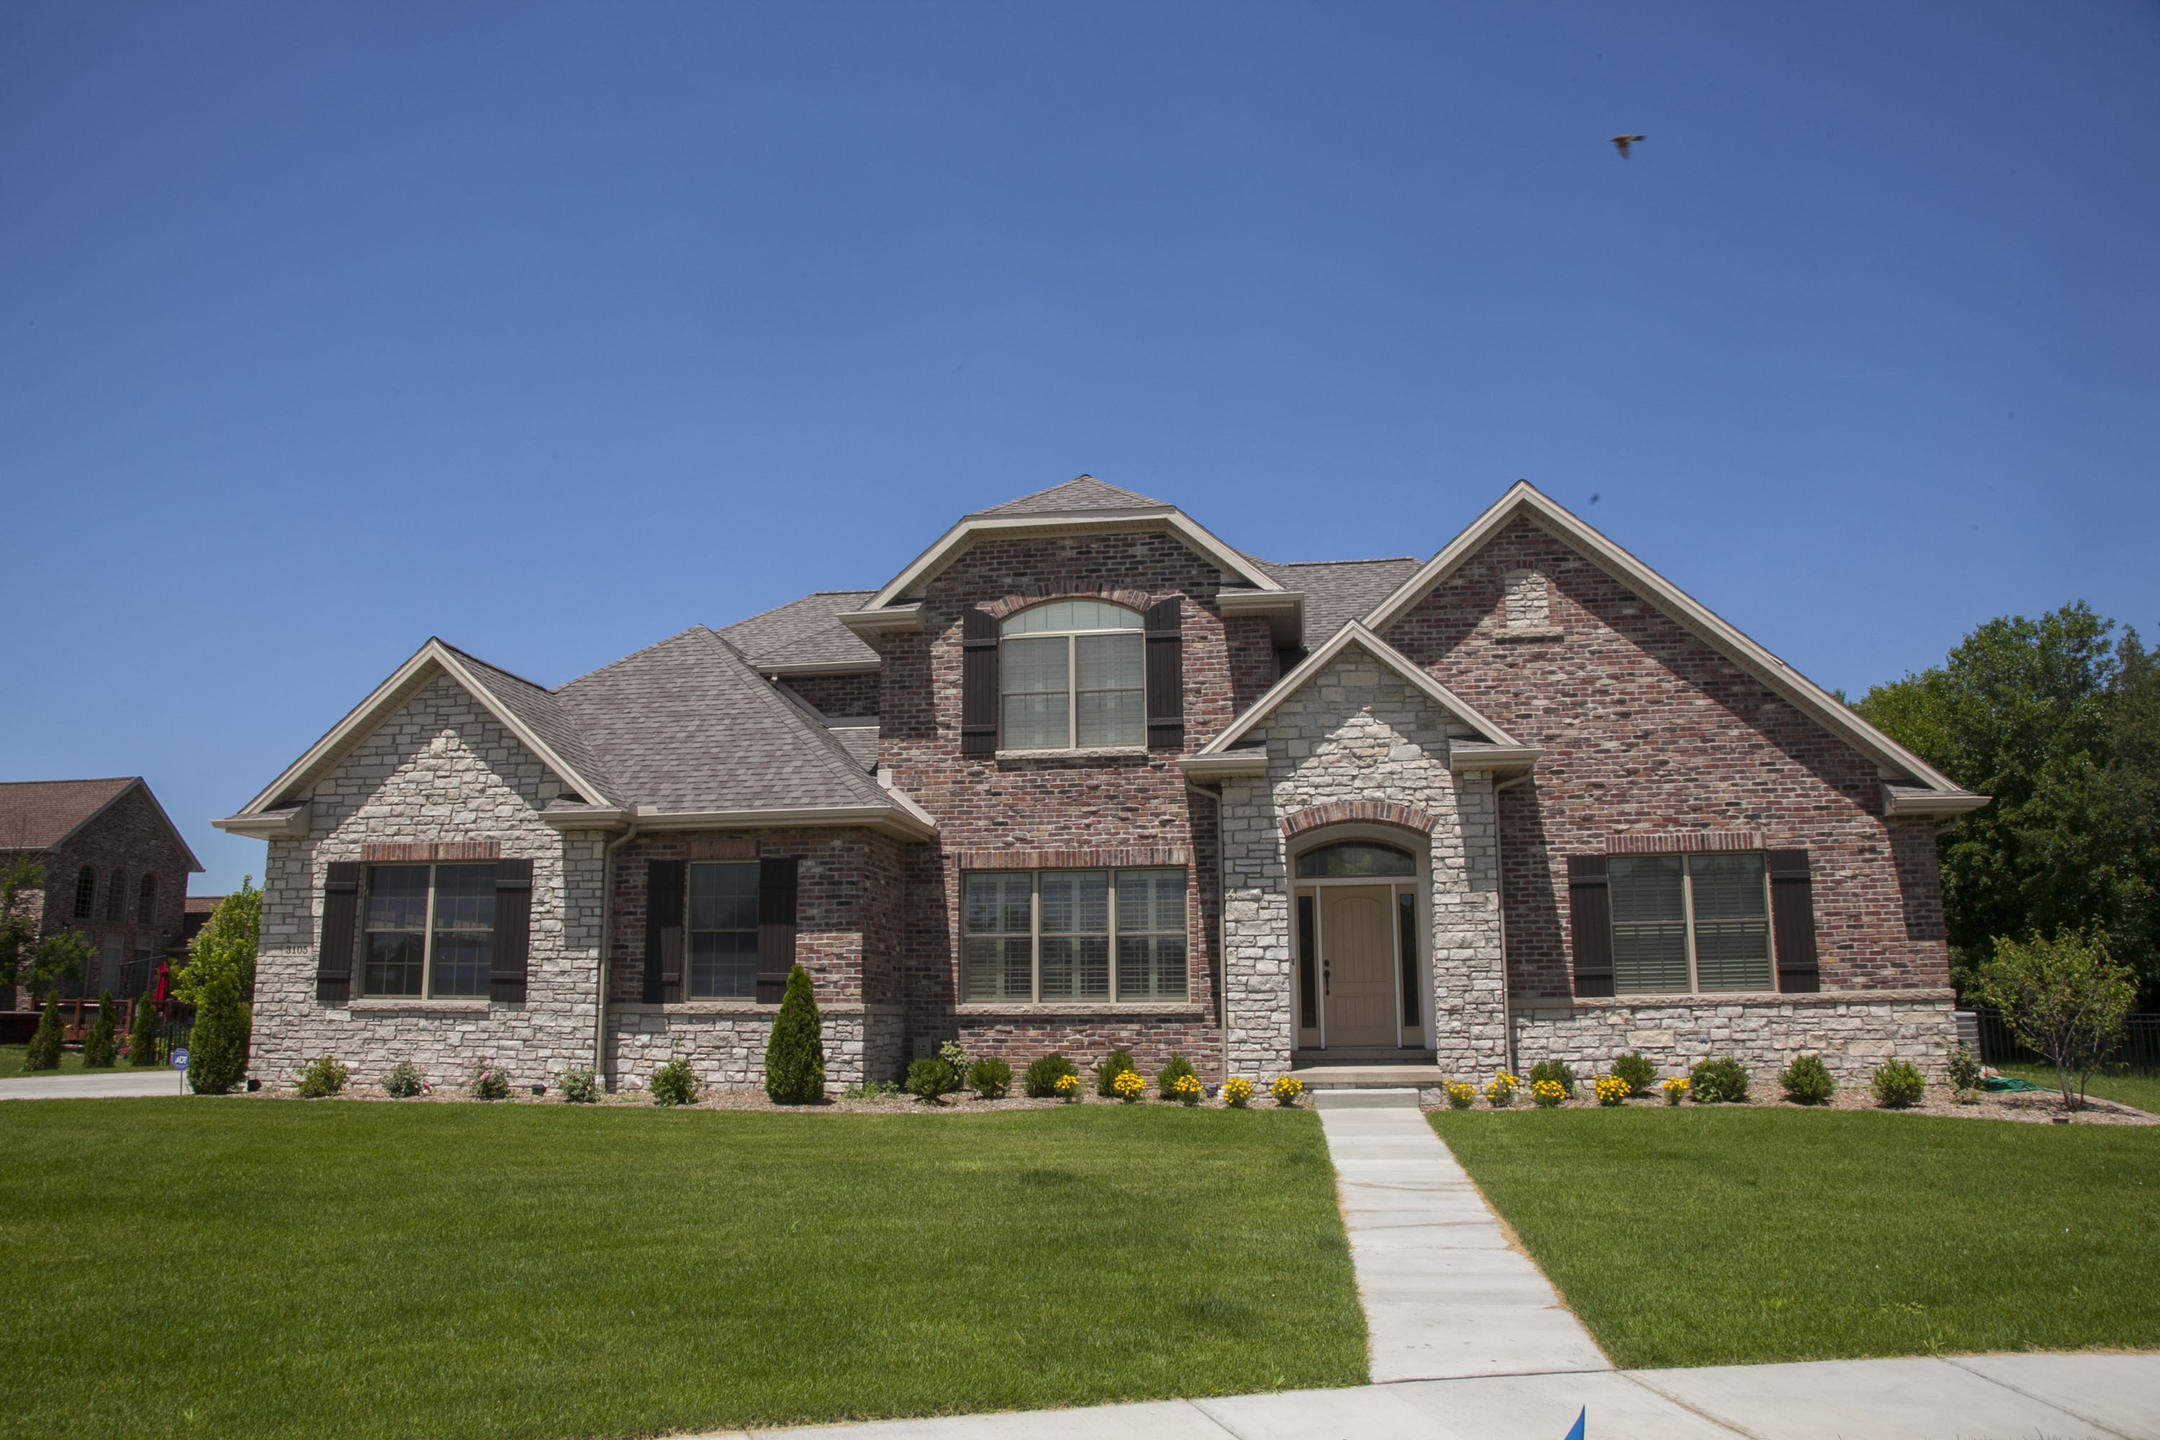 Exterior Elevations Photos | Home Builders Bloomington IL